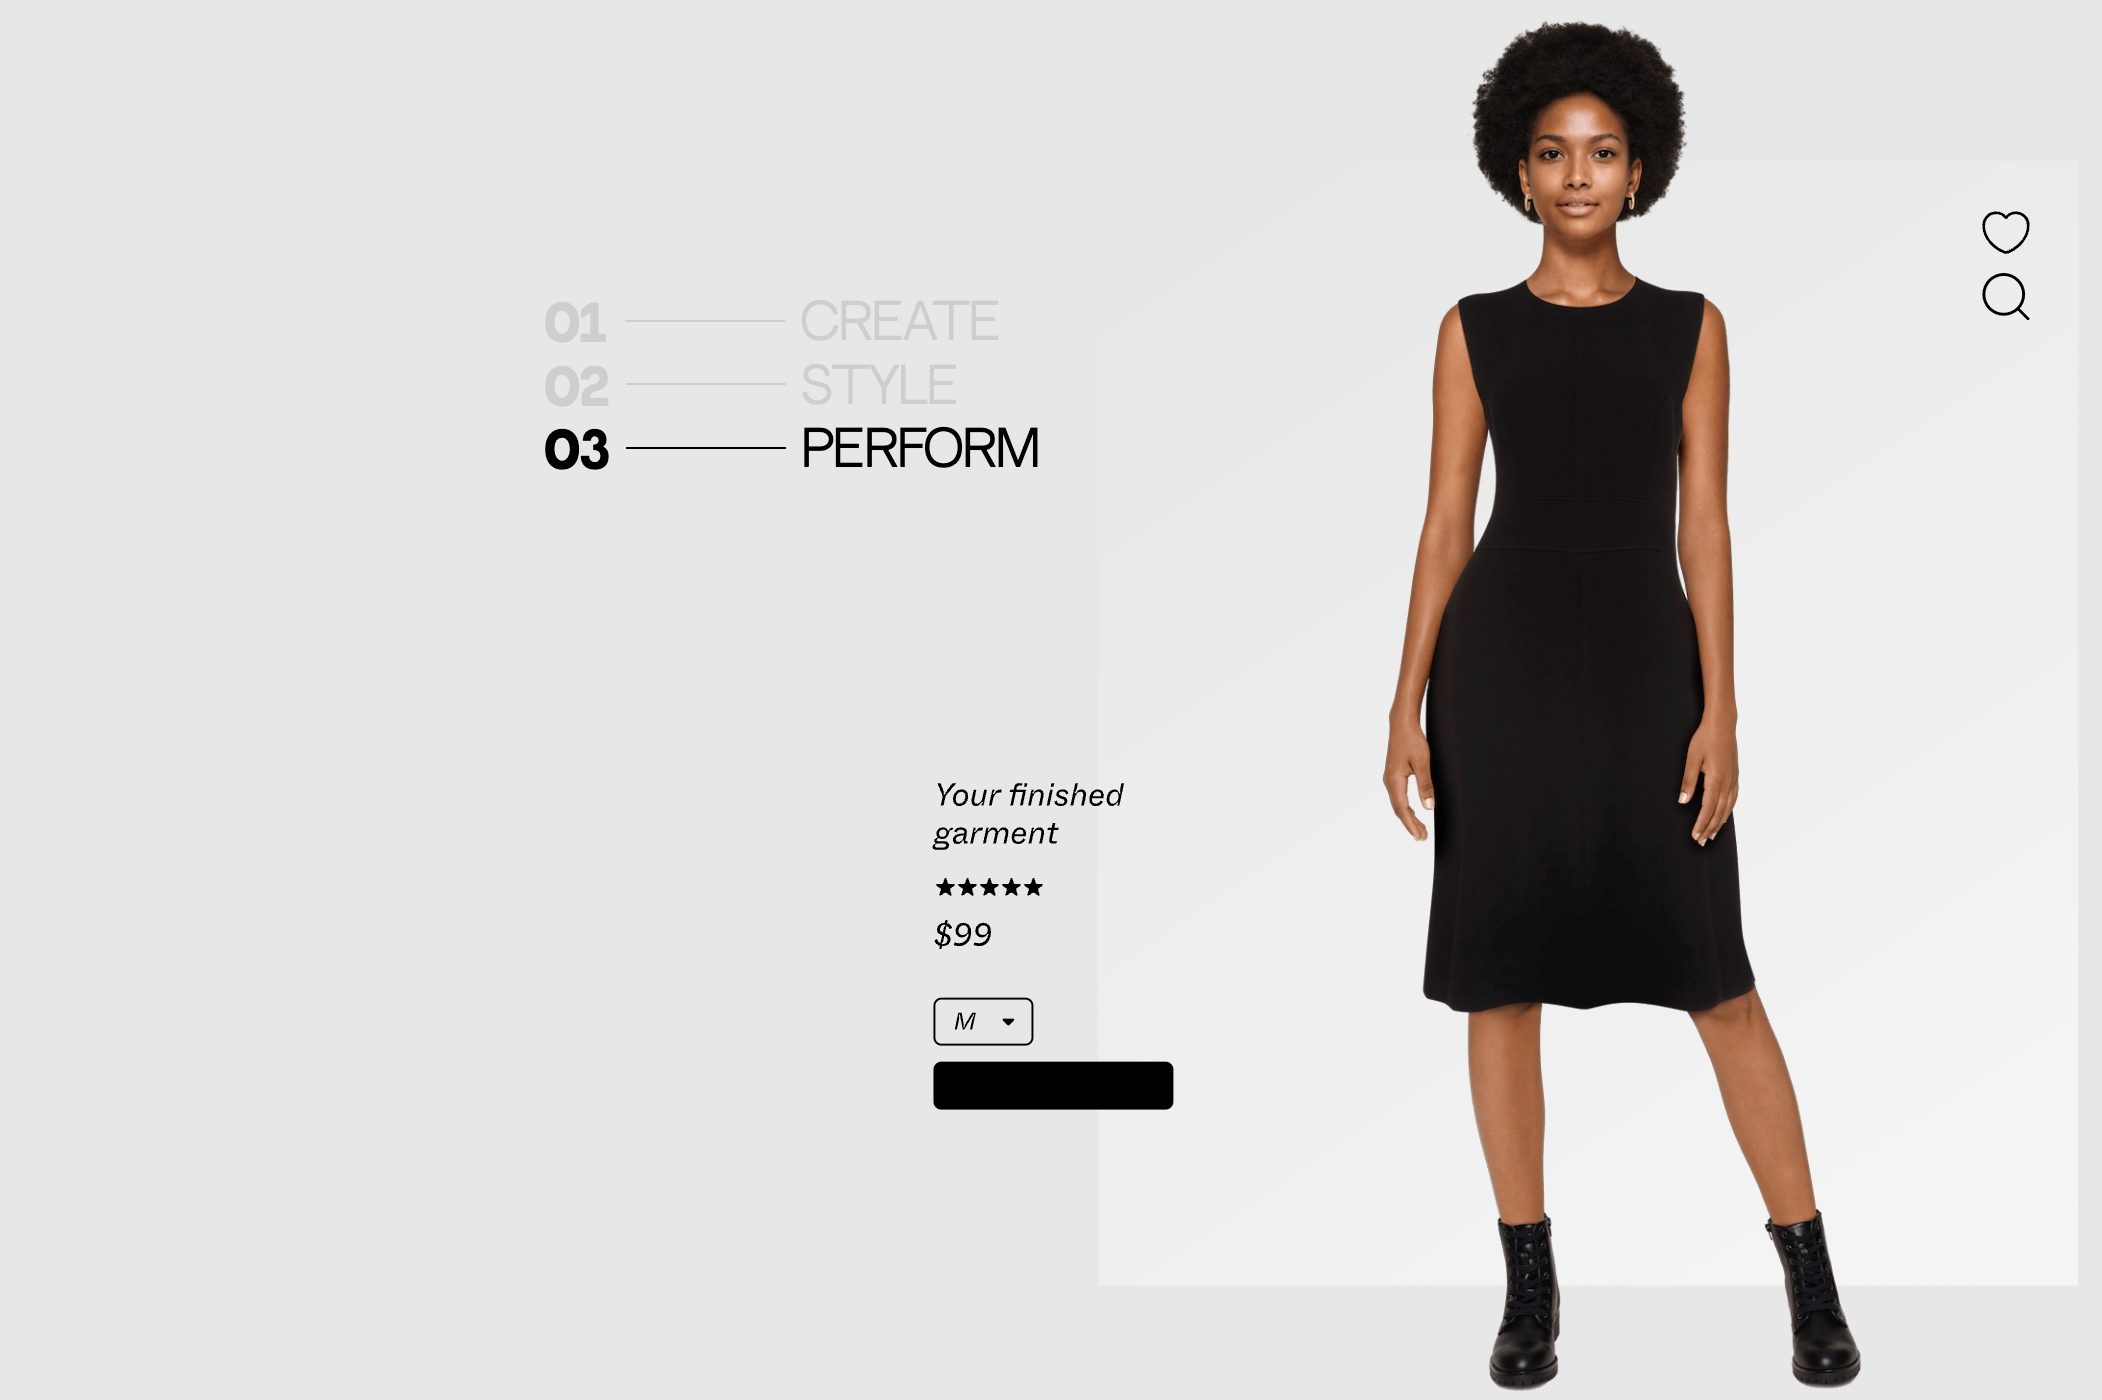 A screenshot from the Lalaland.ai website, showing an AI-generated fashion model wearing customized clothing.